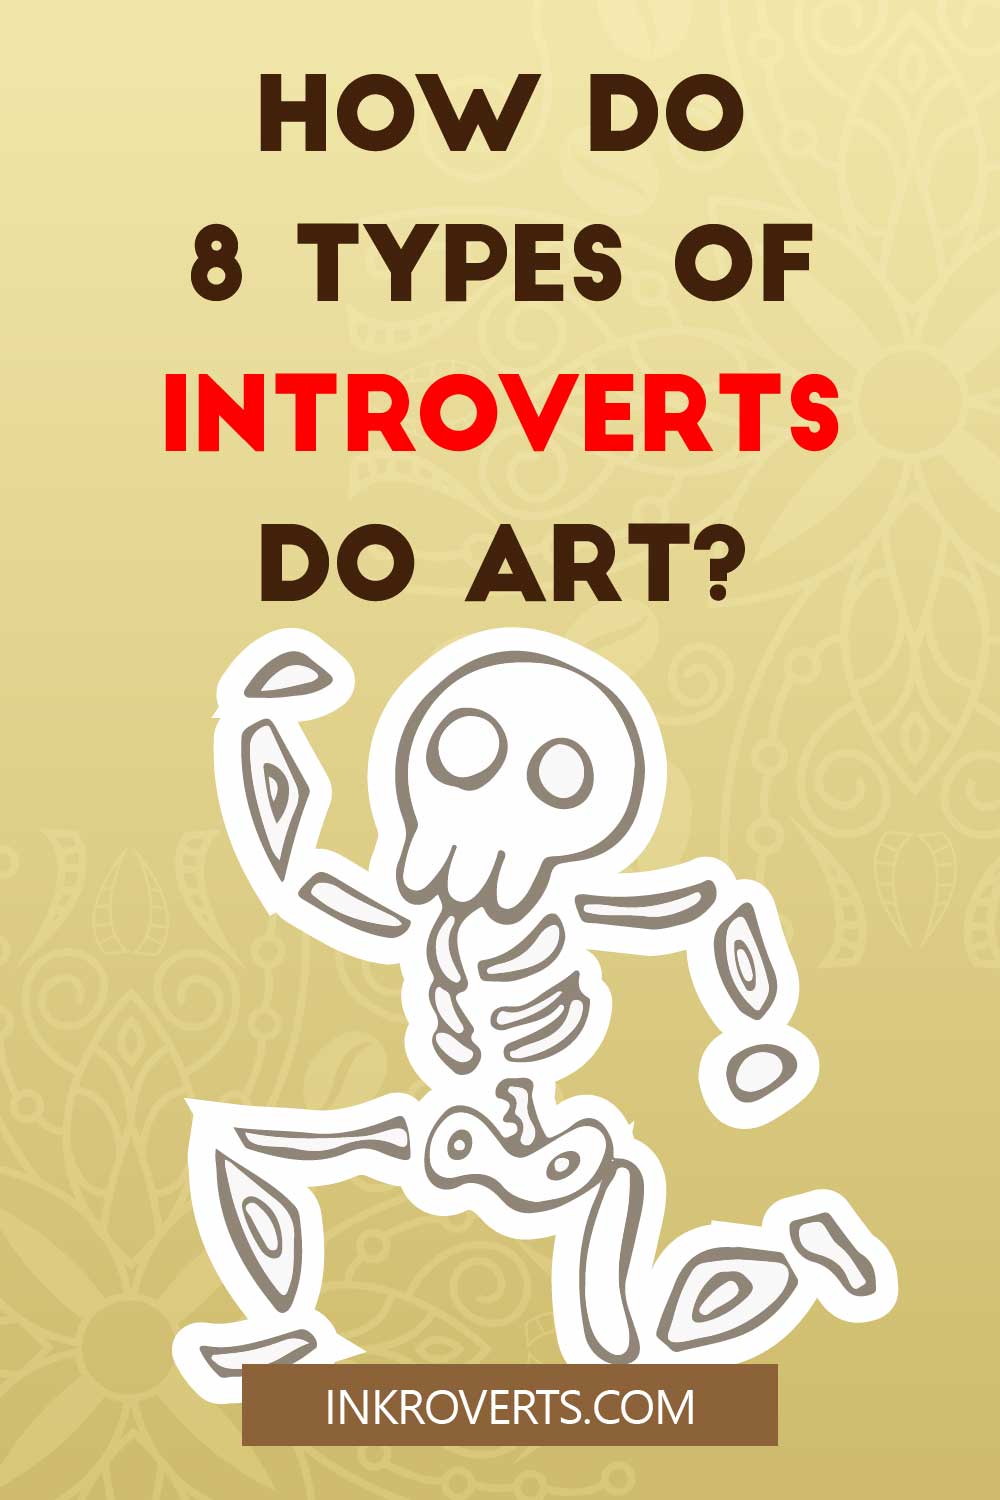 How 8 Types of Introverts Do Art (Myers-Briggs Personality)